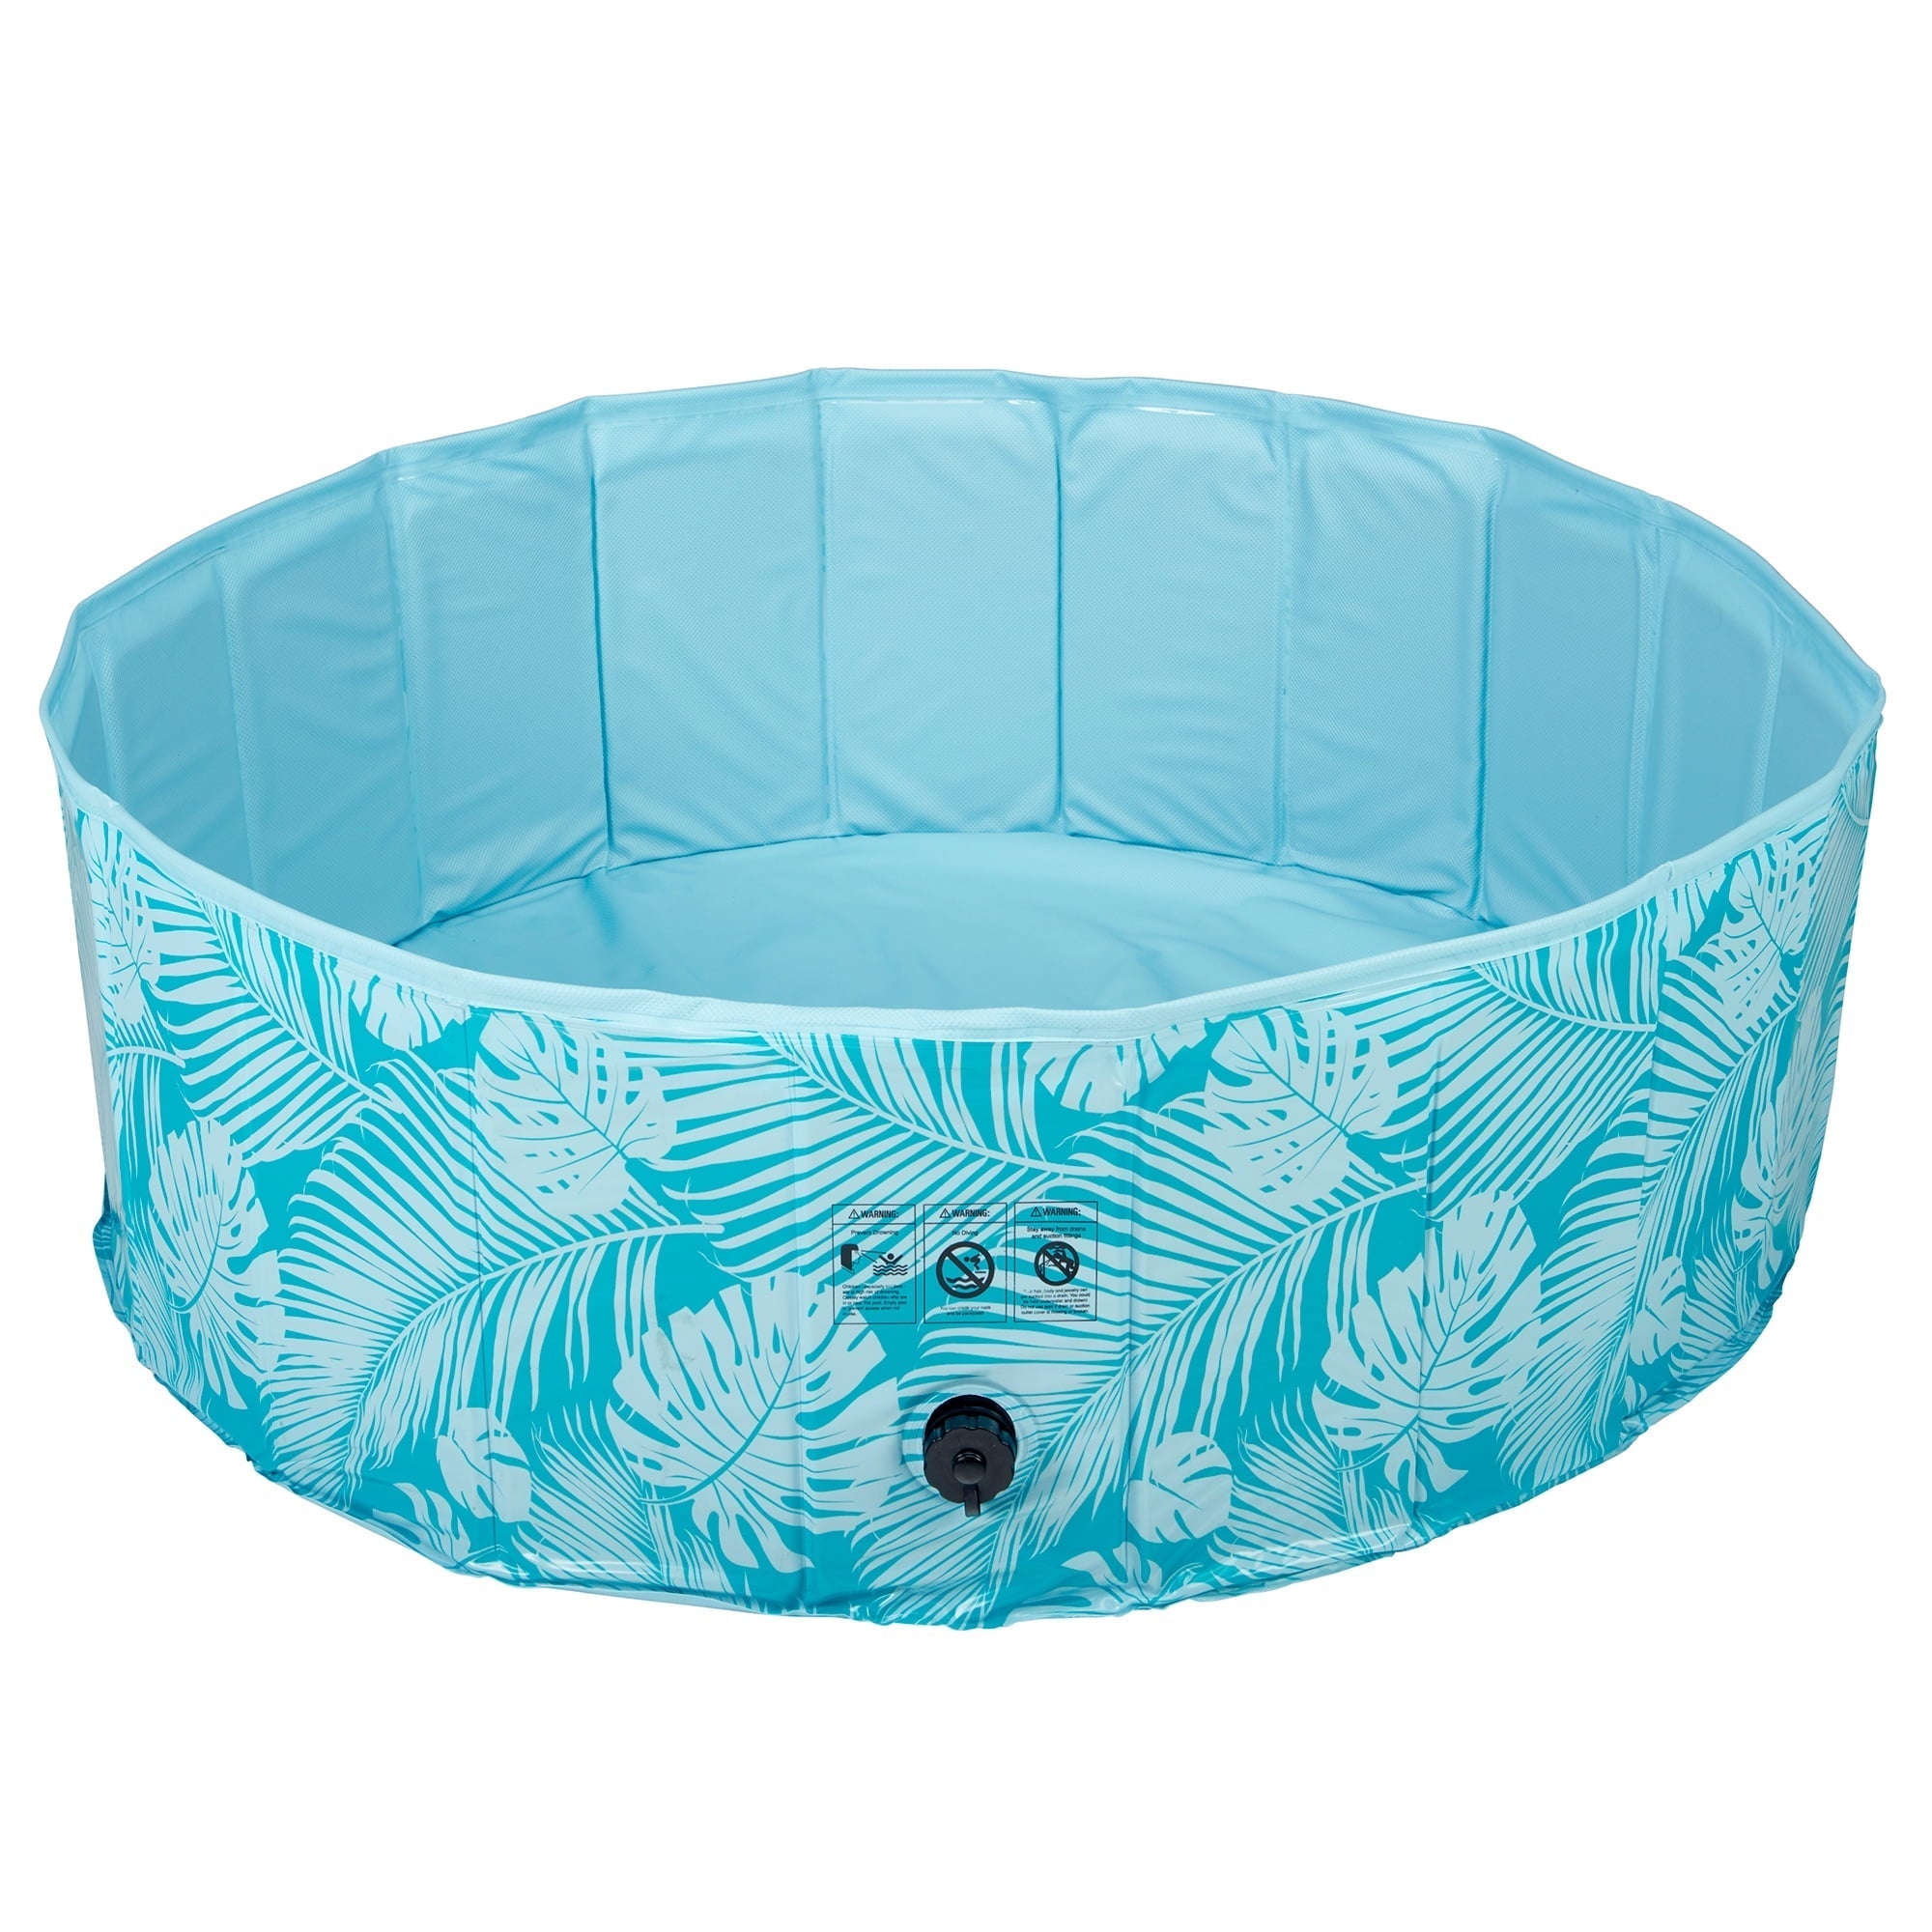 Wholesale prices with free shipping all over United States Vibrant Life Dog Pool, Blue Palm, 39